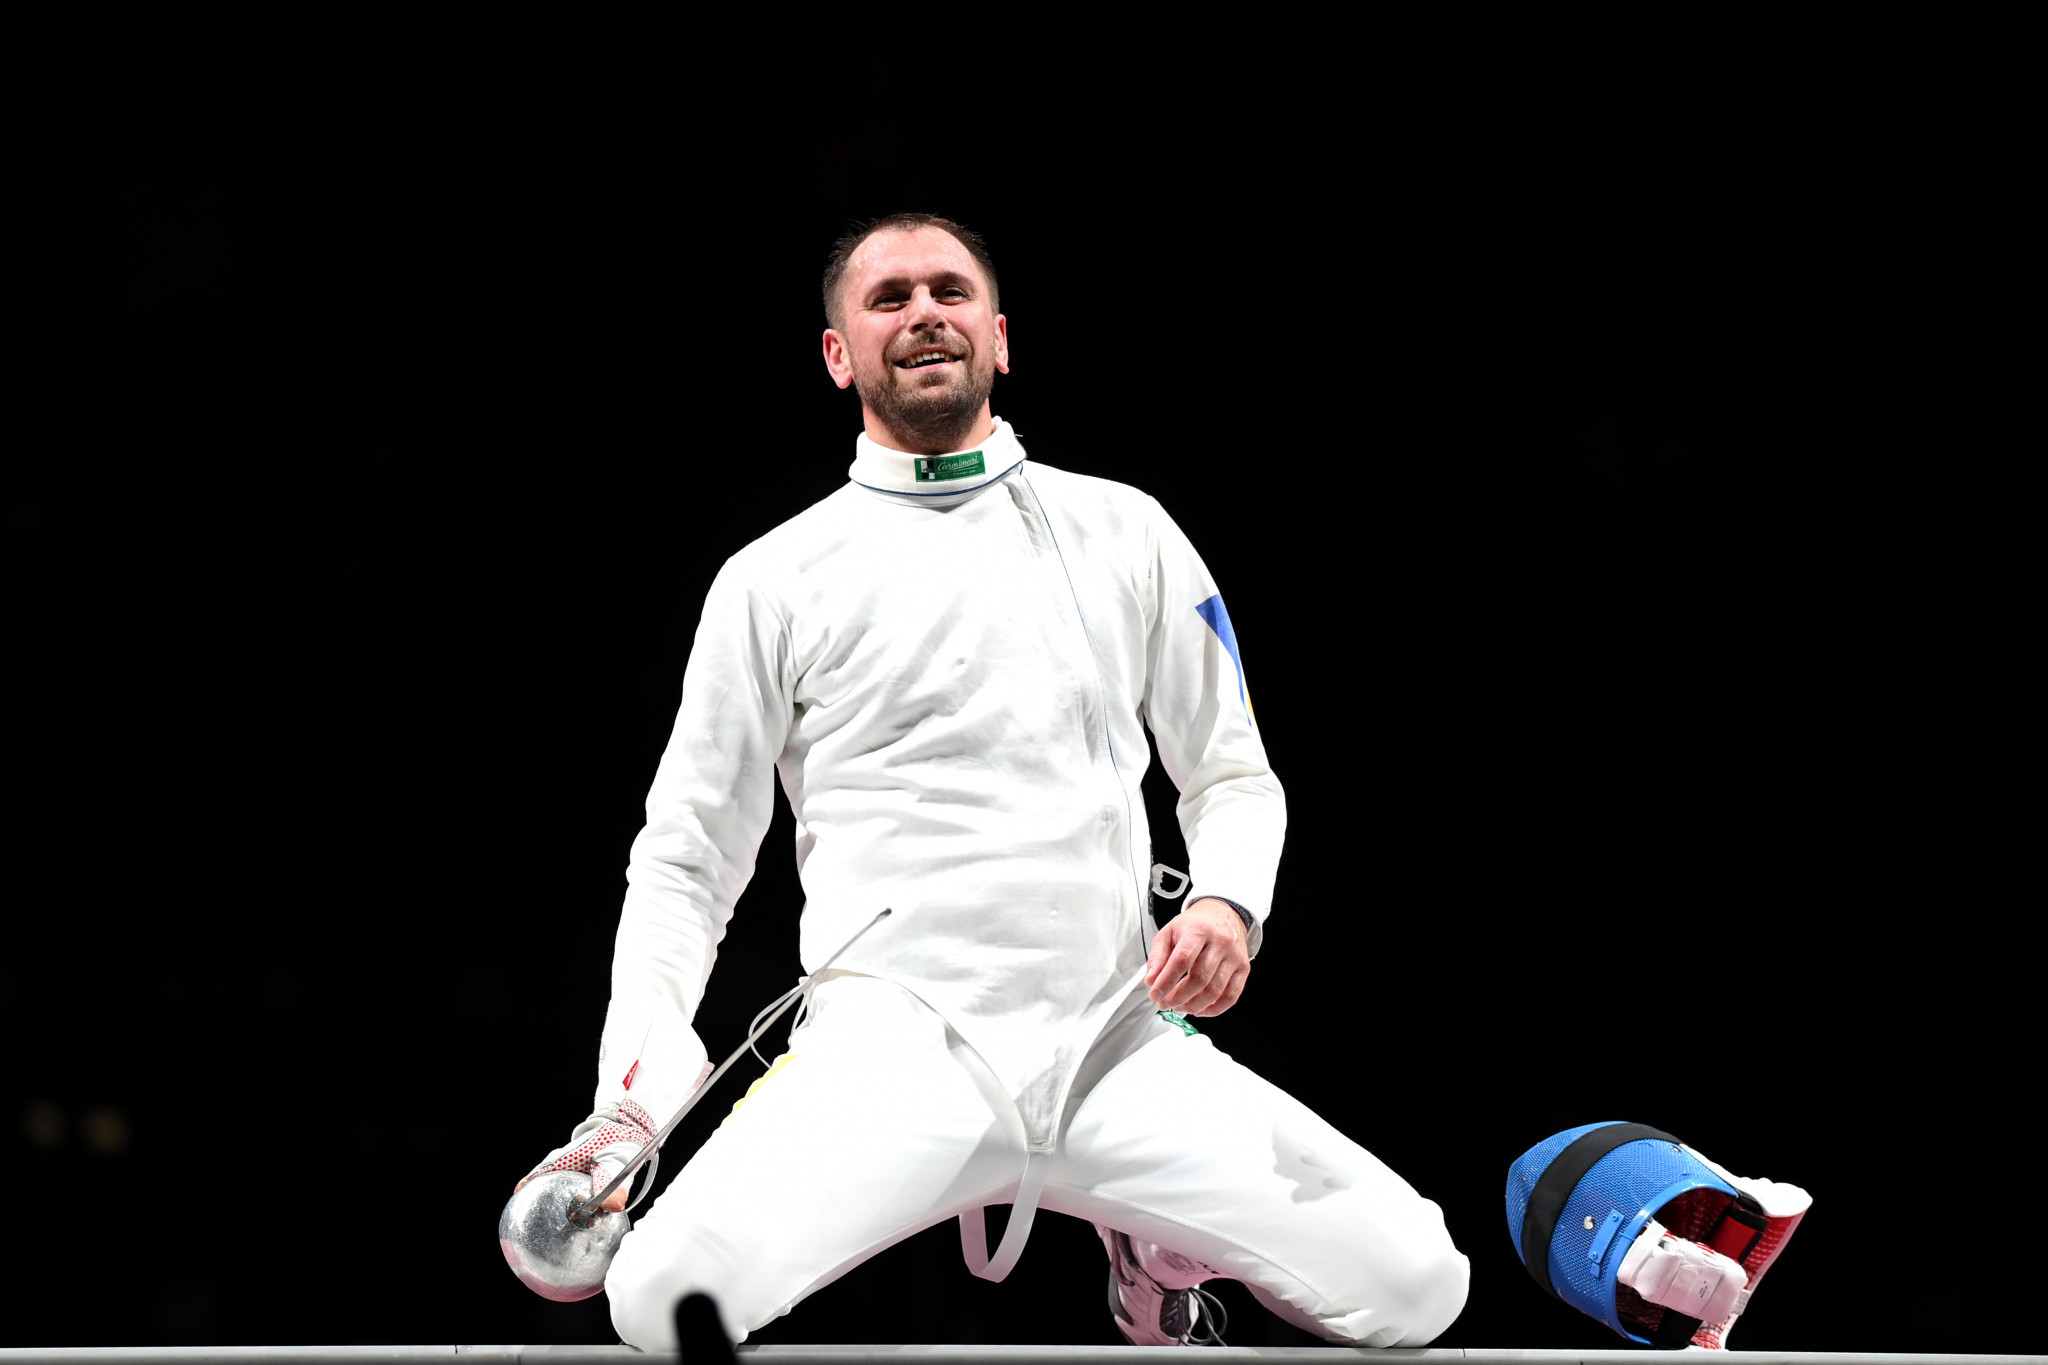 Ukrainian fencer Ihor Reizlin withdrew from a fight against a Russian opponent, Vadim Anokhin, on the fifth day of the FIE World Championships in Milan ©Getty Images